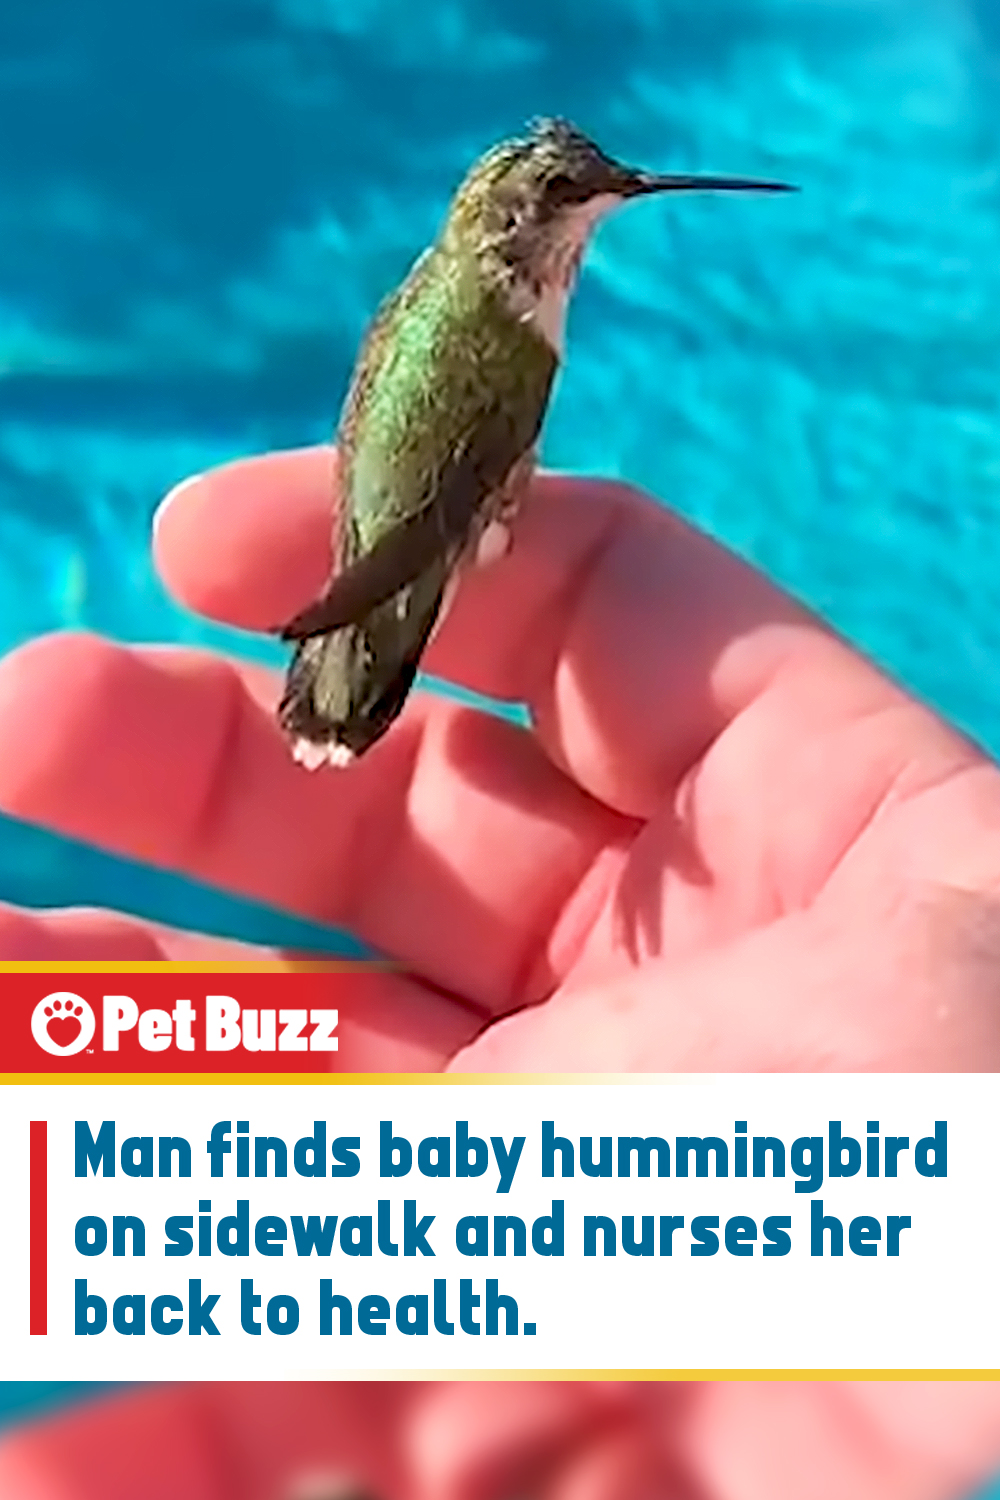 Man finds baby hummingbird on sidewalk and nurses her back to health.